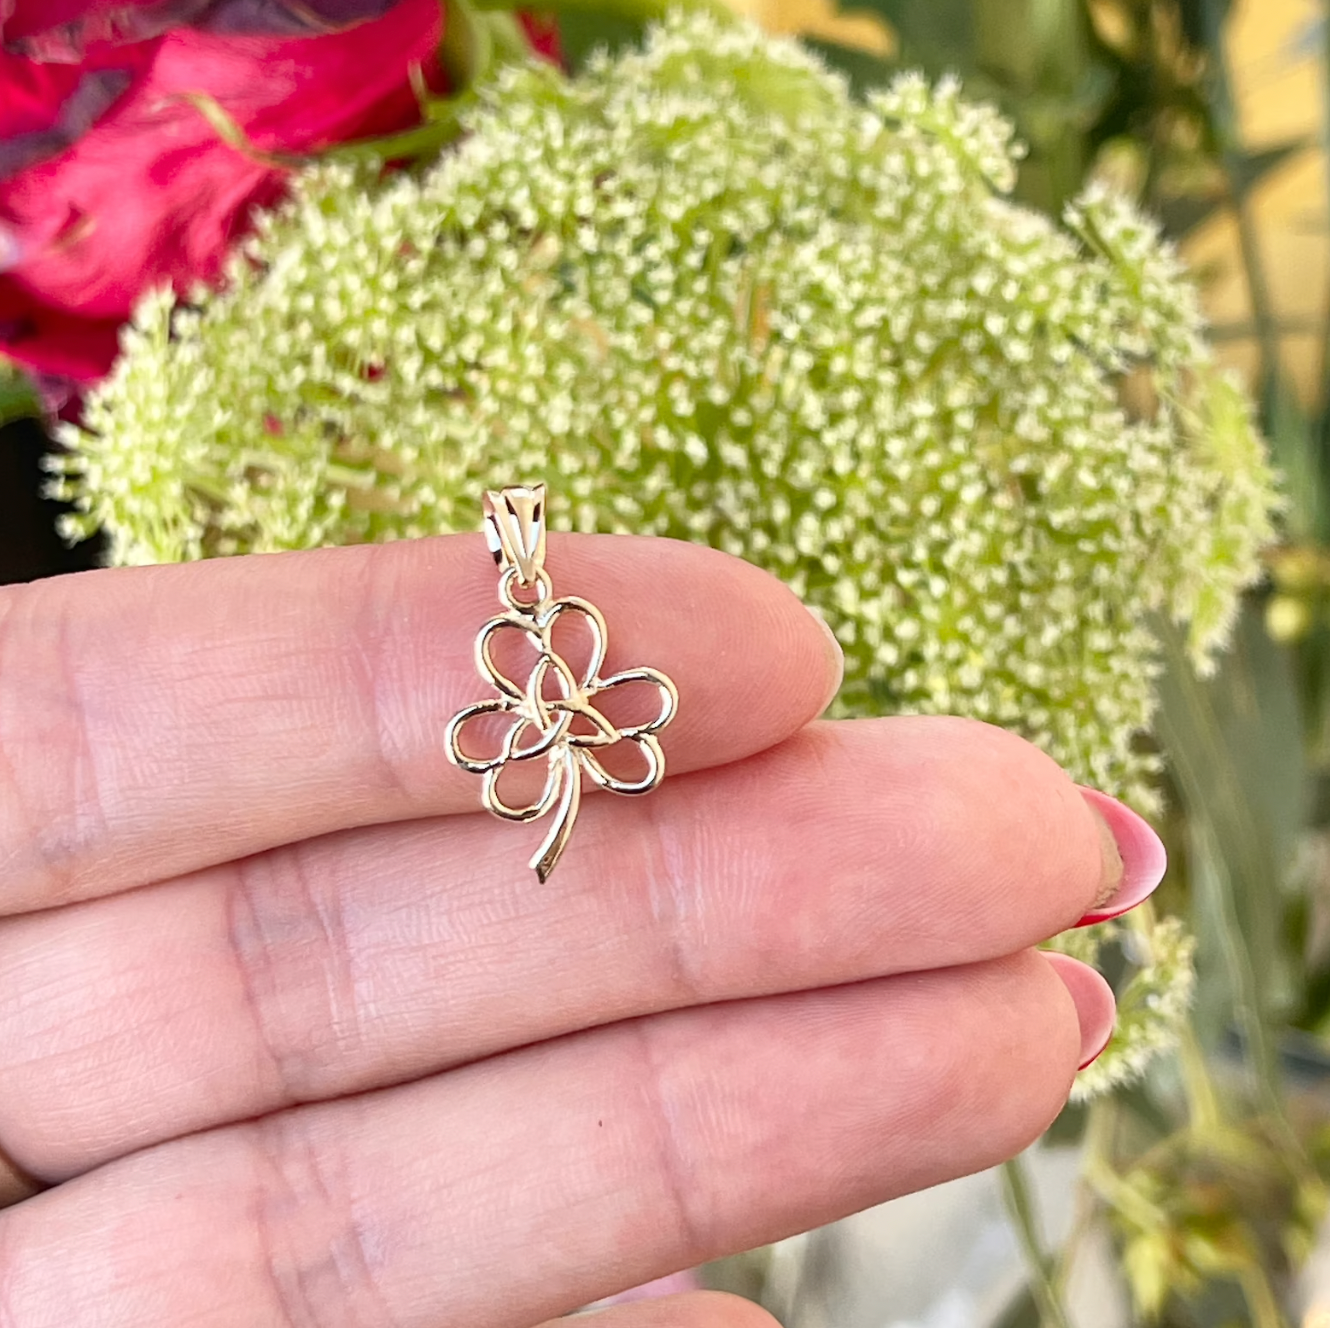 14KT Yellow Gold 3-Leaf Clover trinity Knot Pendant Charm